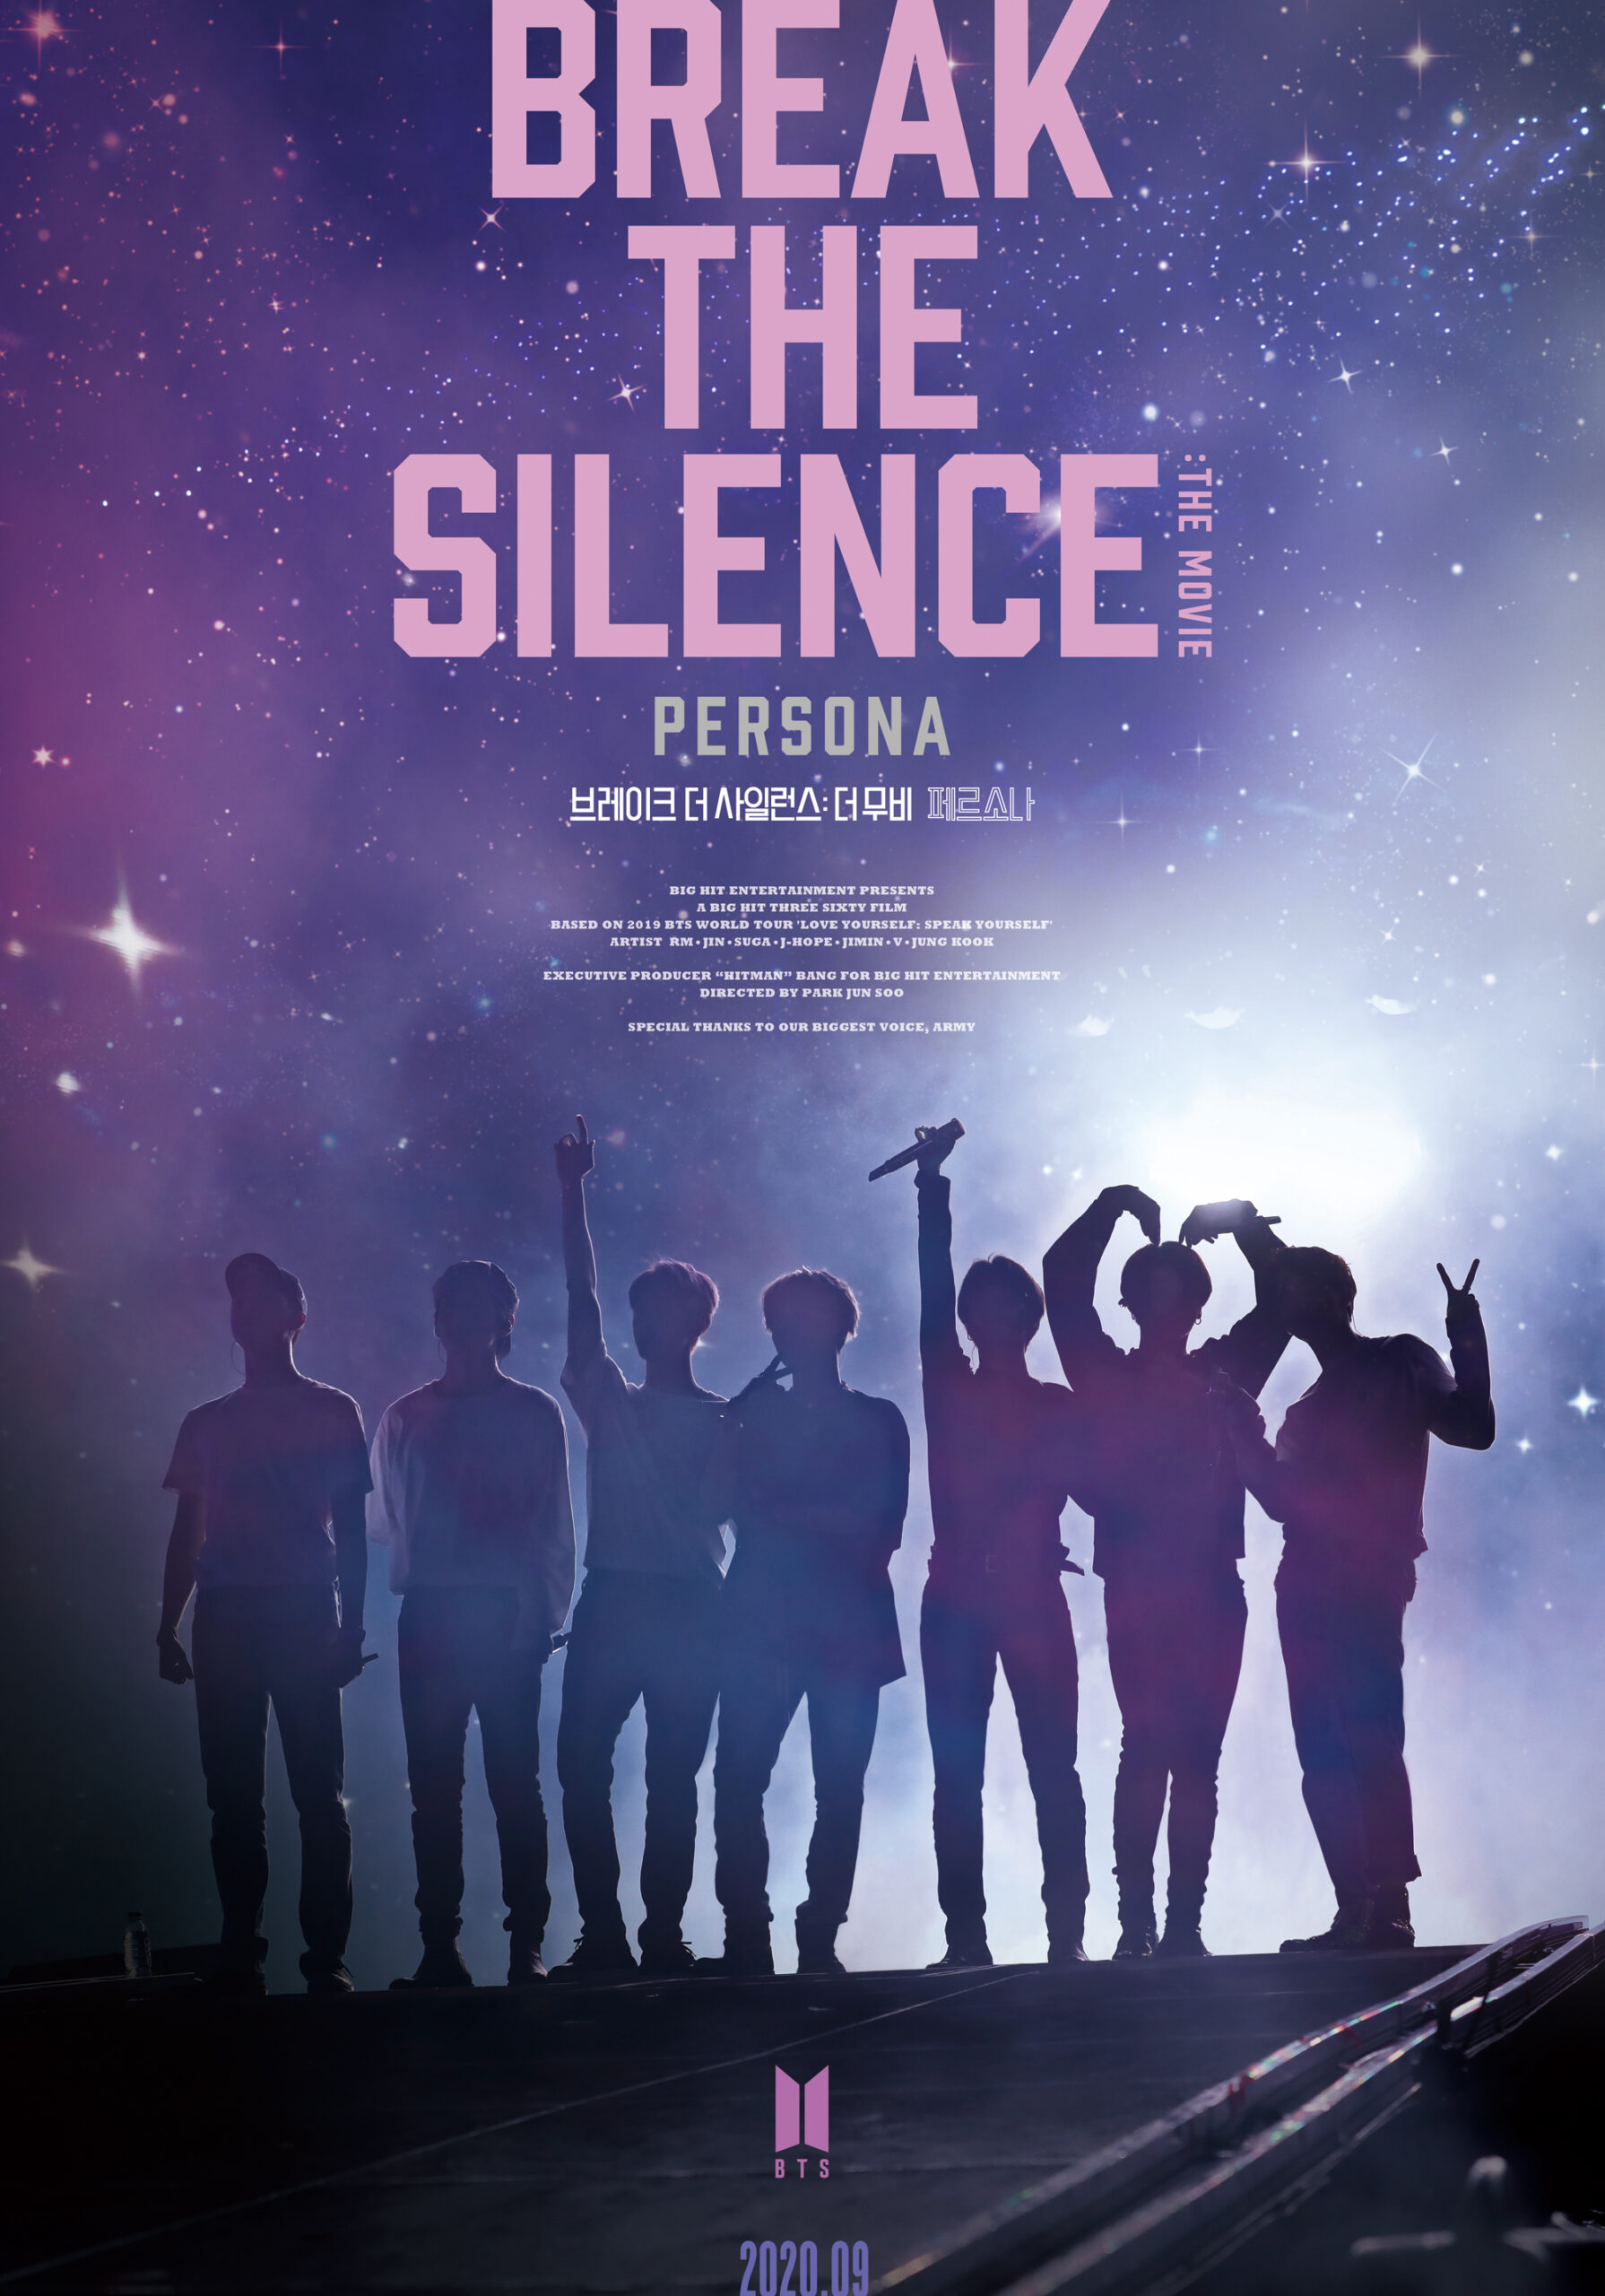 bts-break-the-silence-the-movie-delayed-due-to-covid-19-crisis-in-seoul-2